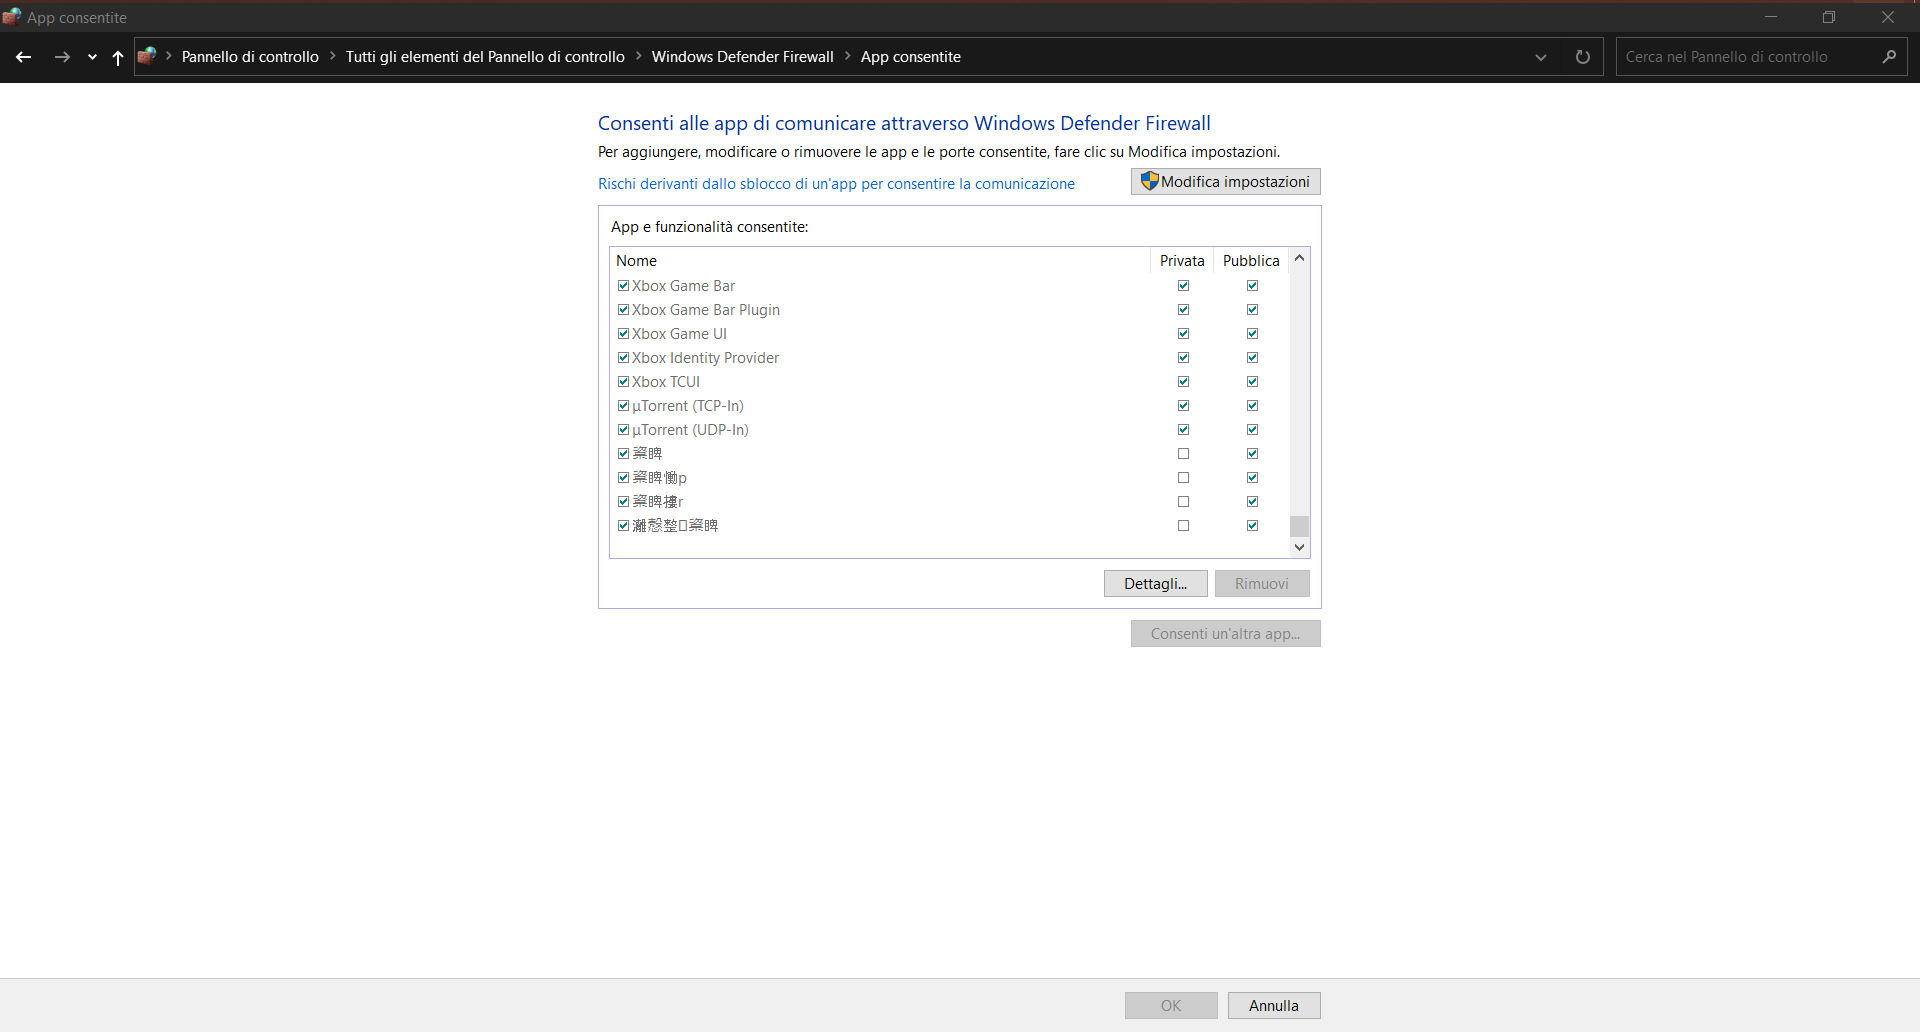 Chinese lettering in windows defender firewall 9cb6aa66-e5f2-4a90-8a02-30cd12066588?upload=true.png